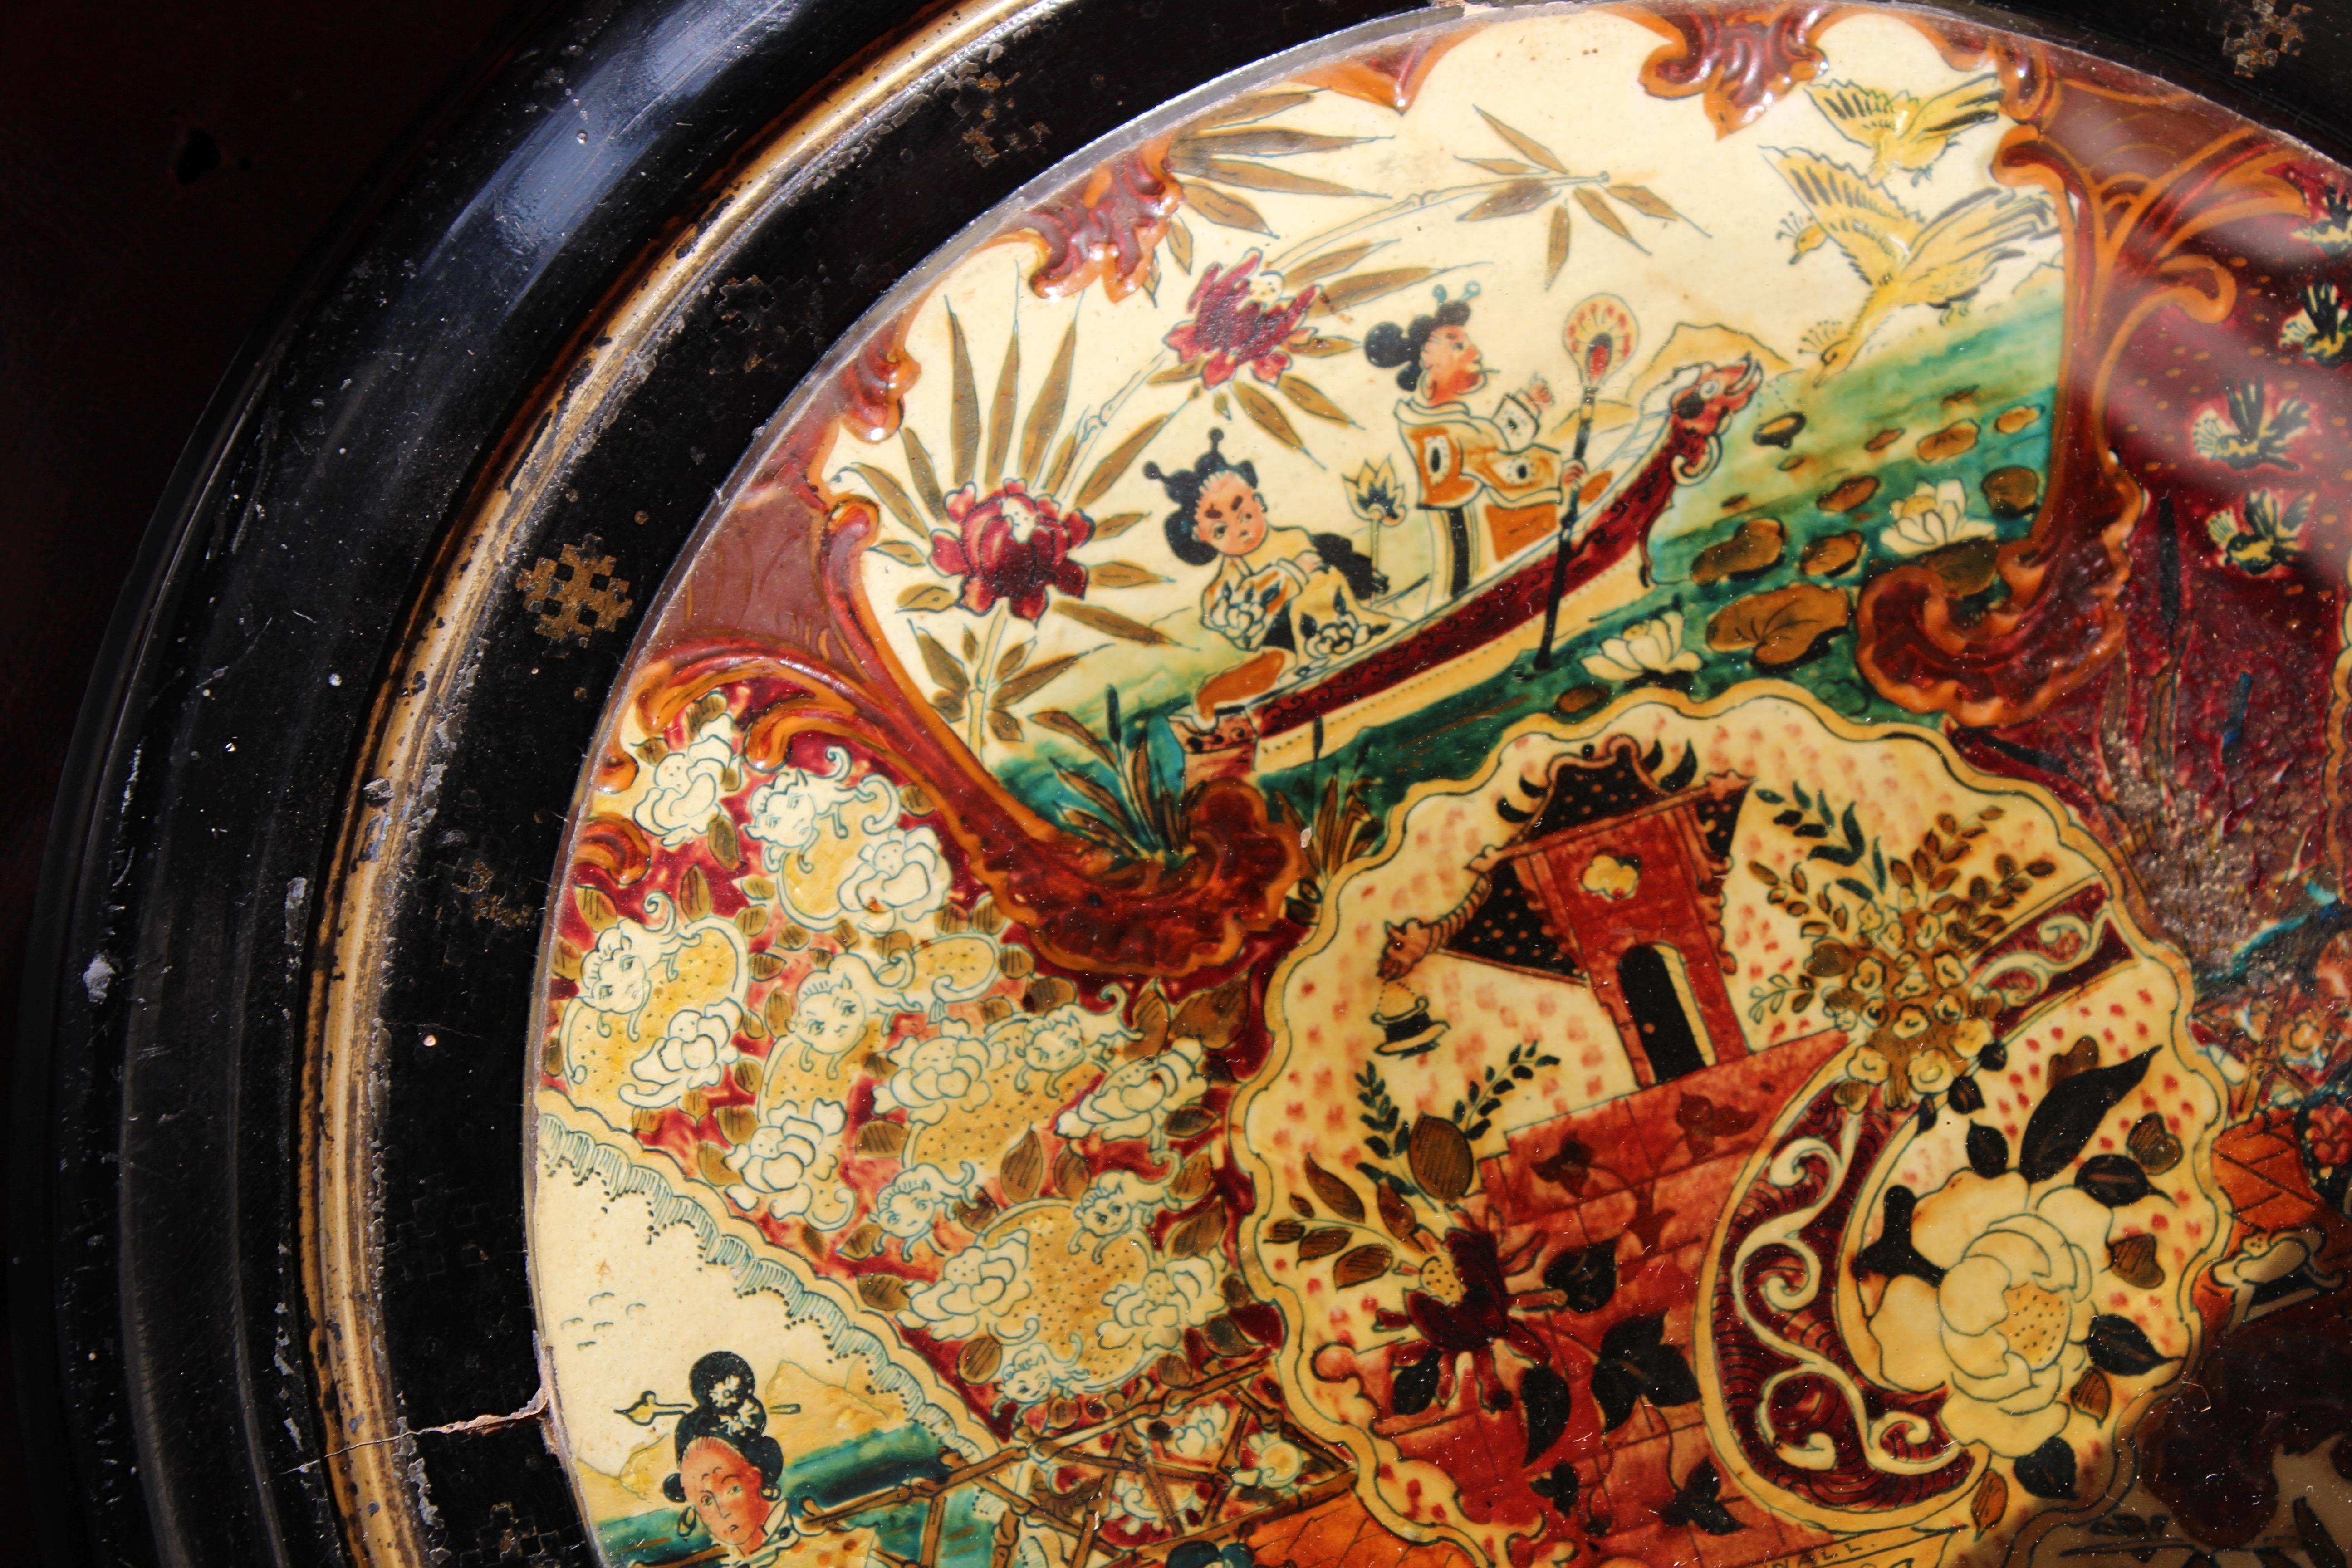 A very decorative Chinoiserie enamel plate, profusely decorated with typical exterior scenes, dragons, pagodas and oriental figures. 

House in a wonderful ebonised and gilt decorated frame, in very much country house condition.

Signed C Pownall